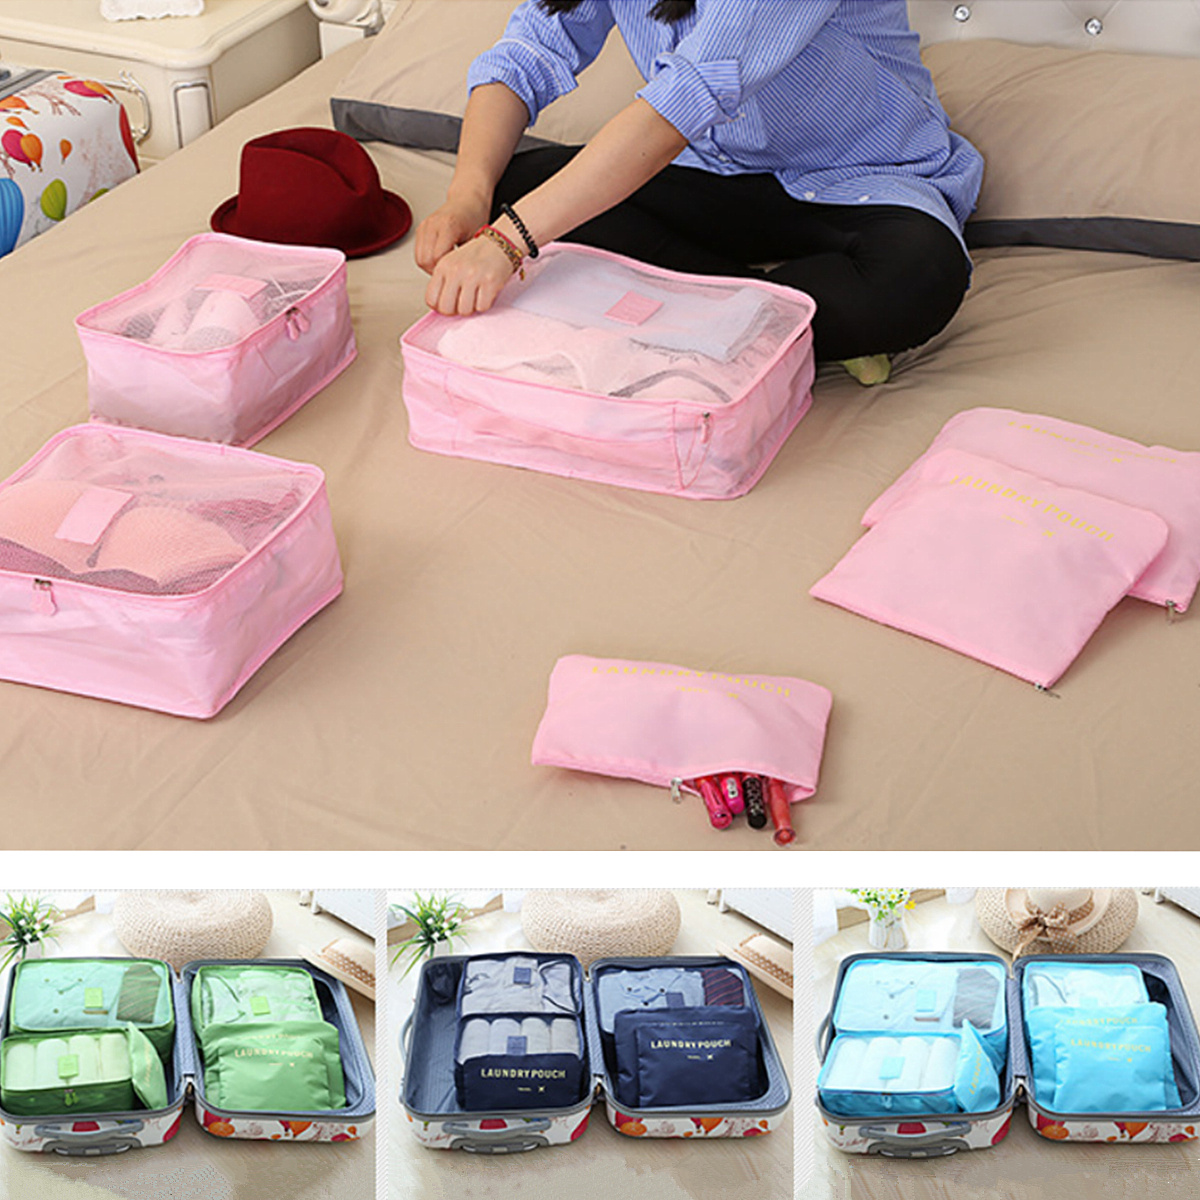 IPRee™ 6Pcs Travel Portable Storage Bag Set Clothes Packing Luggage Organizer Waterproof Pouch 10